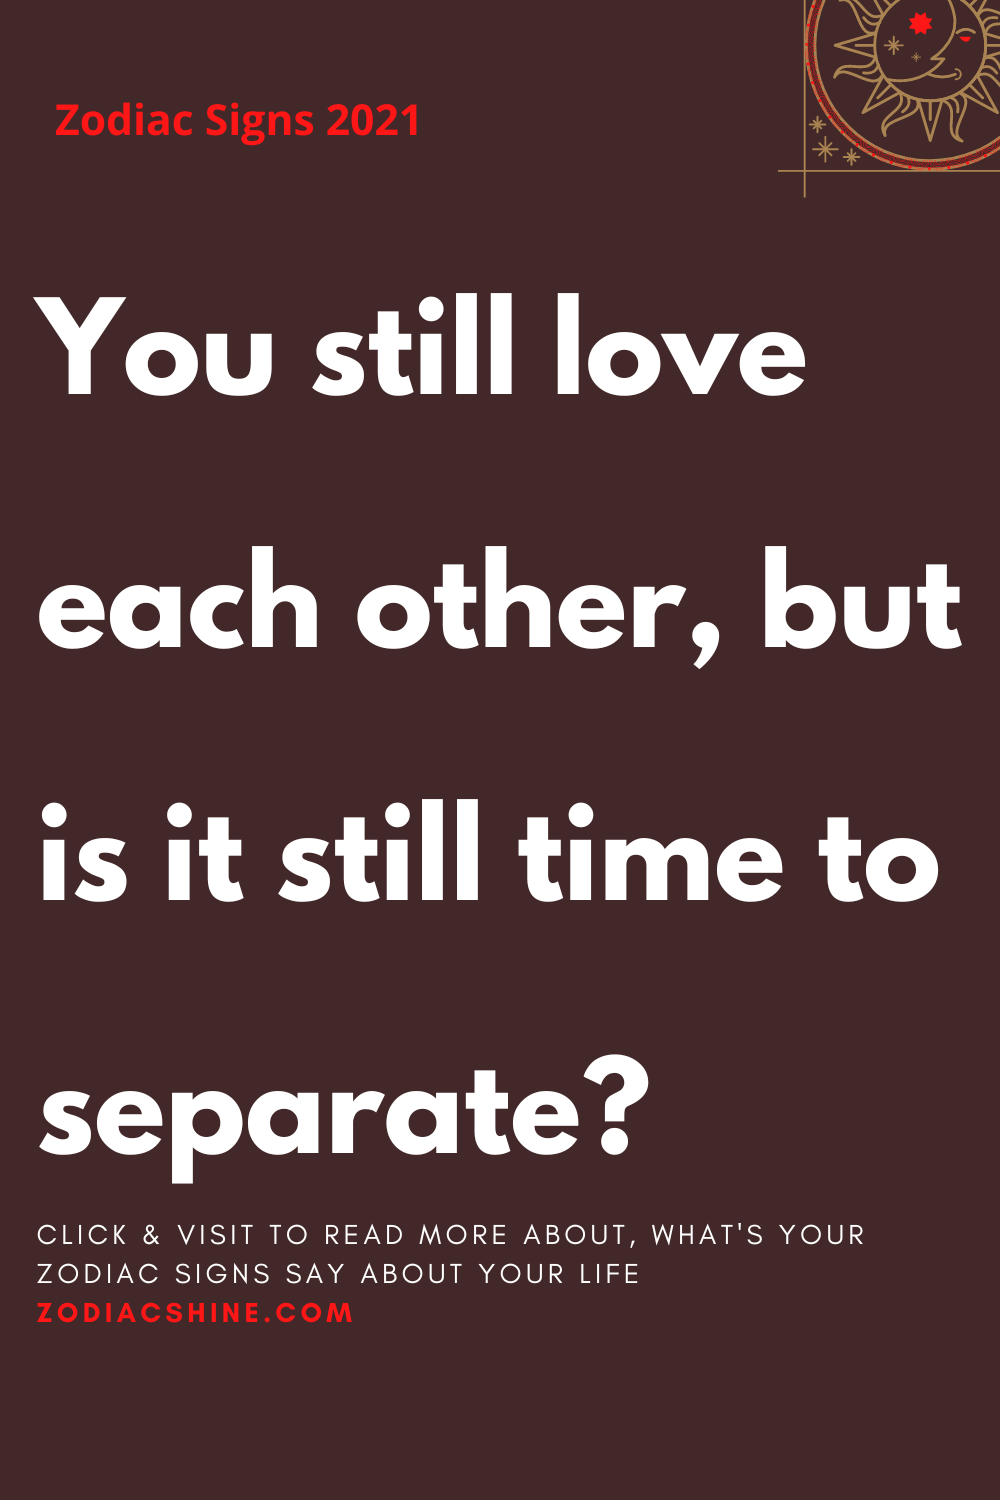 You still love each other, but is it still time to separate?